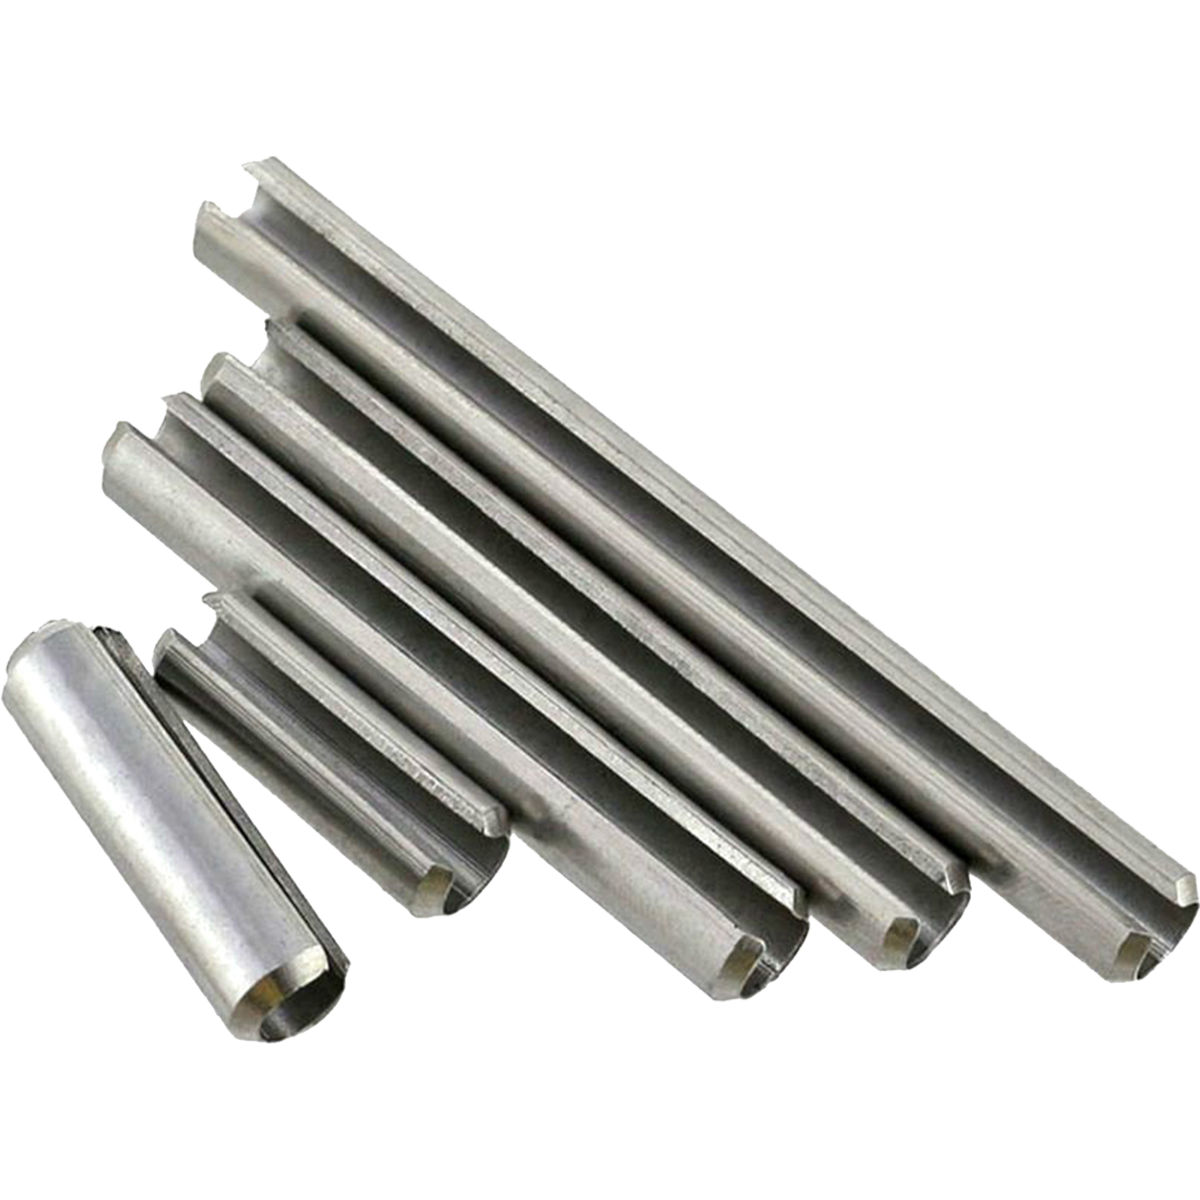 Slotted spring pins available in a variety of sizes. Used where a more ridged connection is needed within the drilled hole and to join two adjacent components.